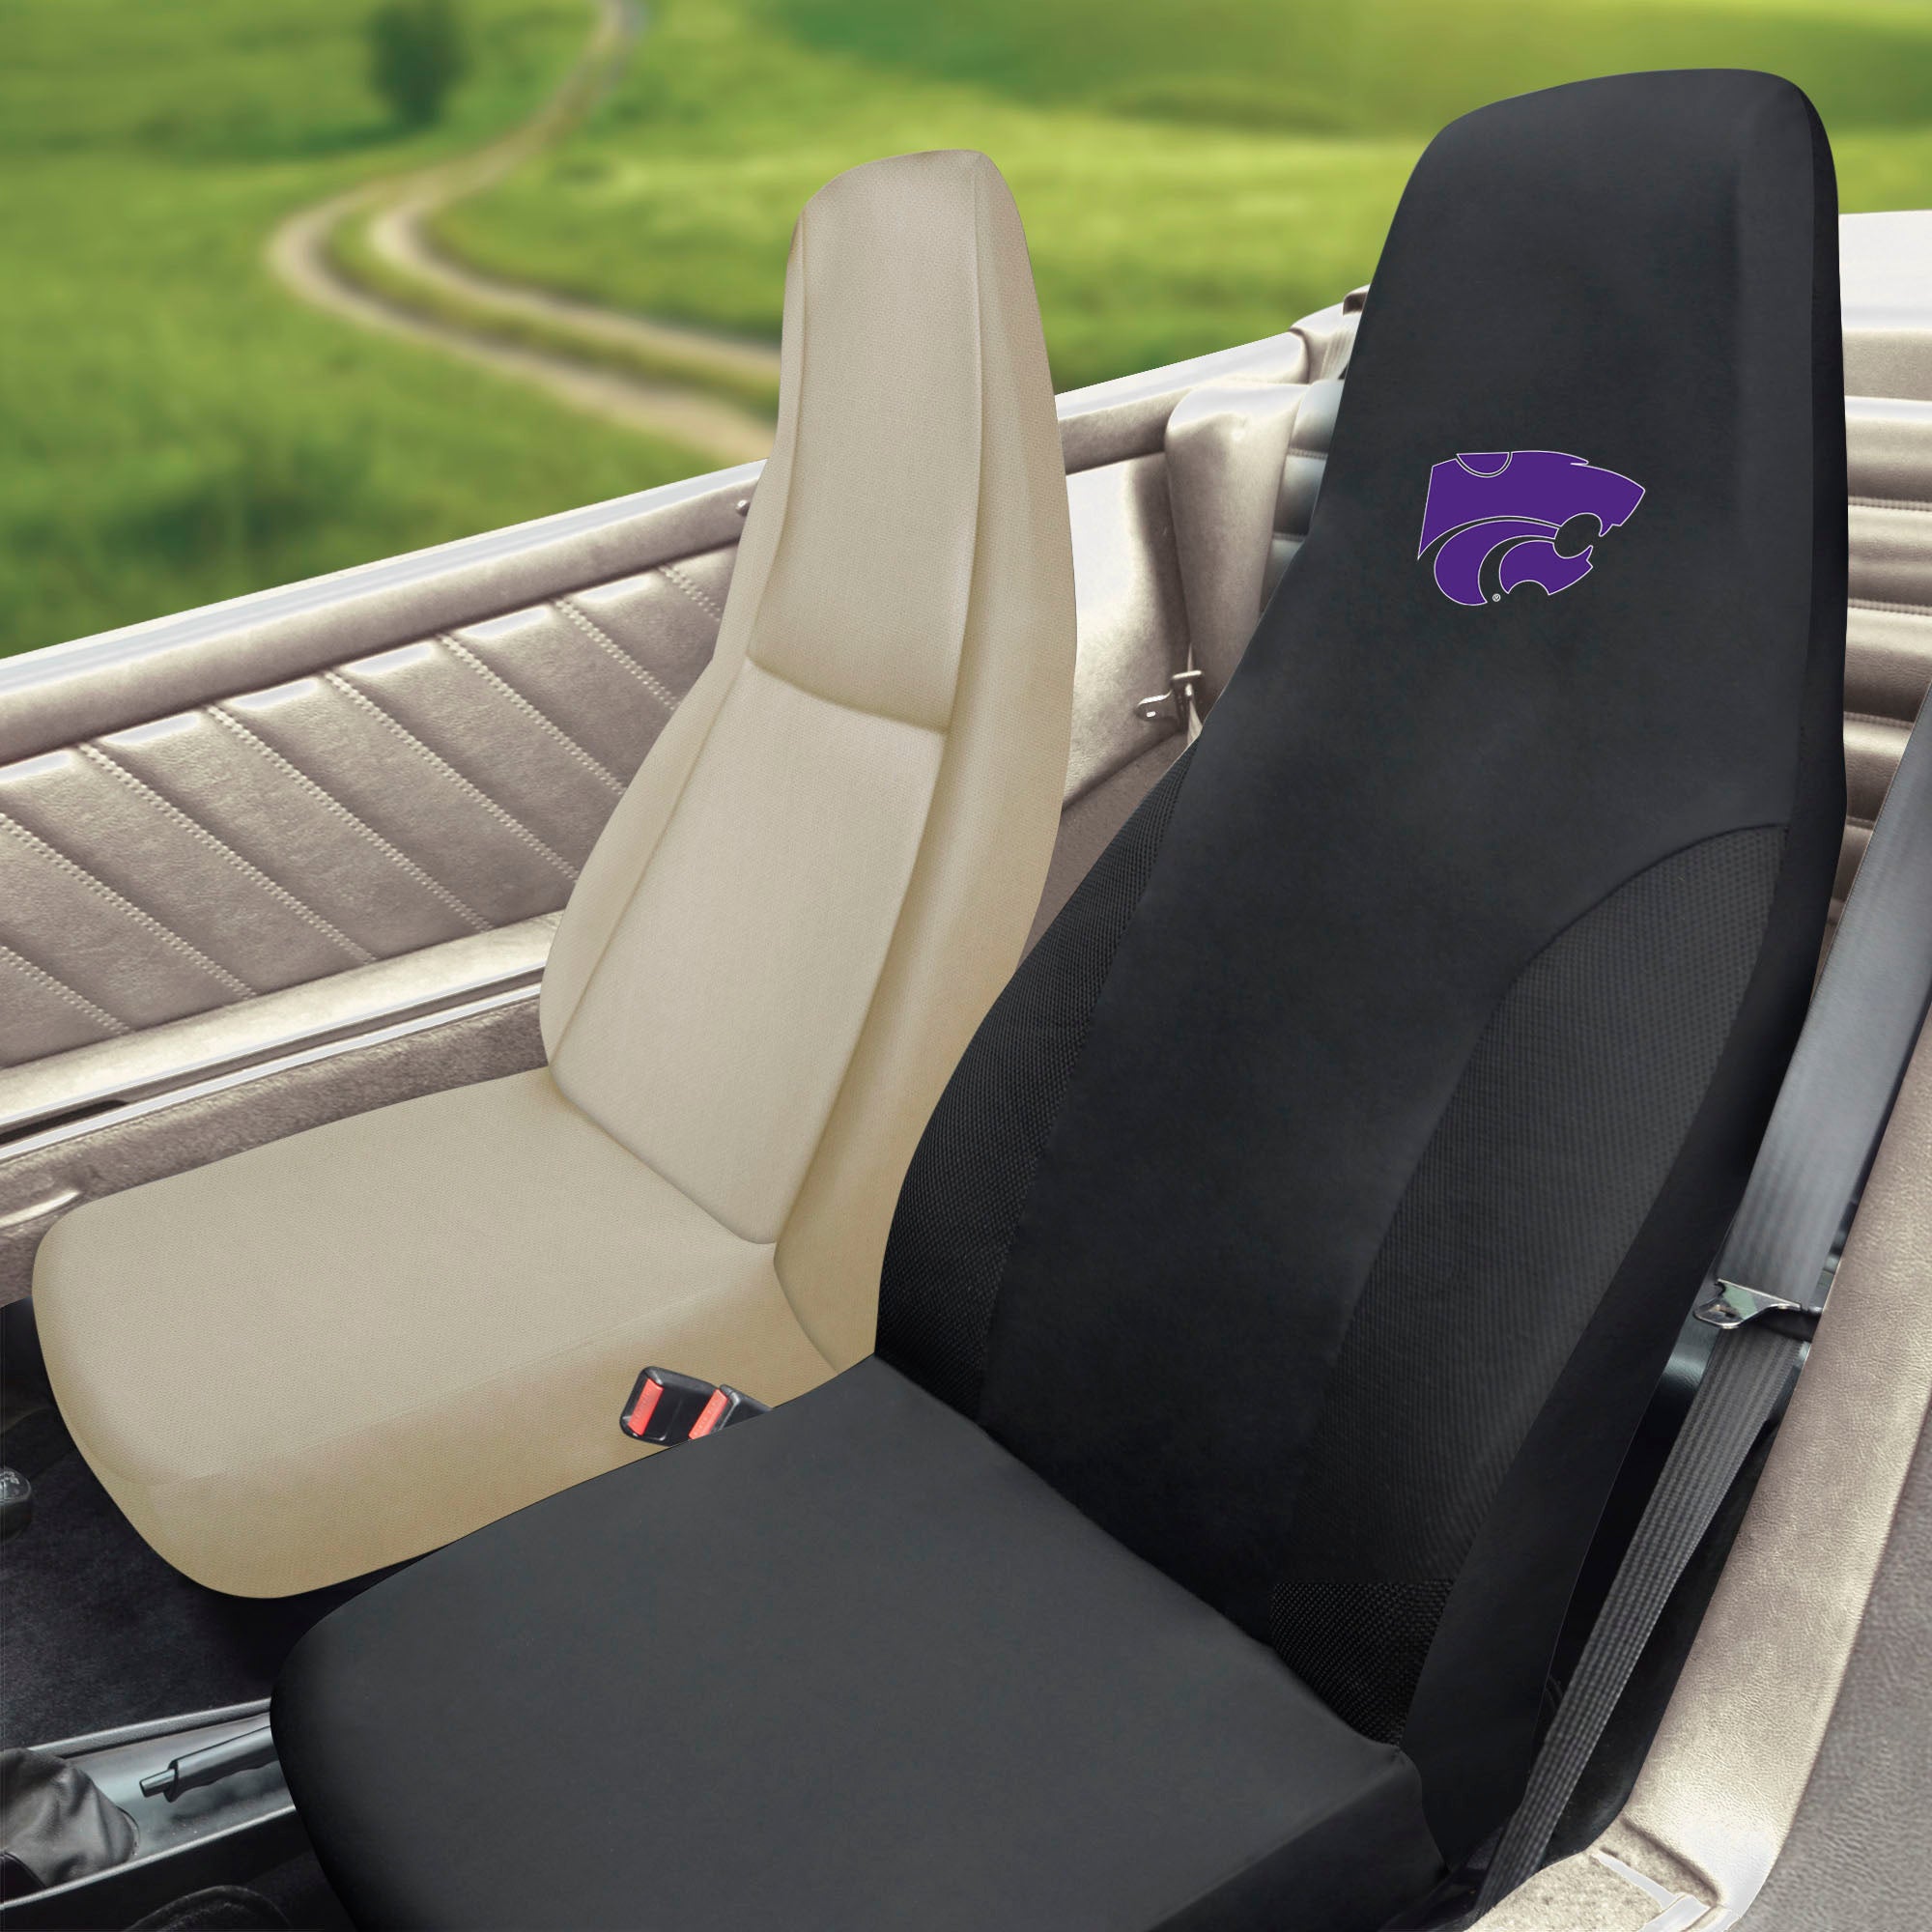 FANMATS, Kansas State University Embroidered Seat Cover